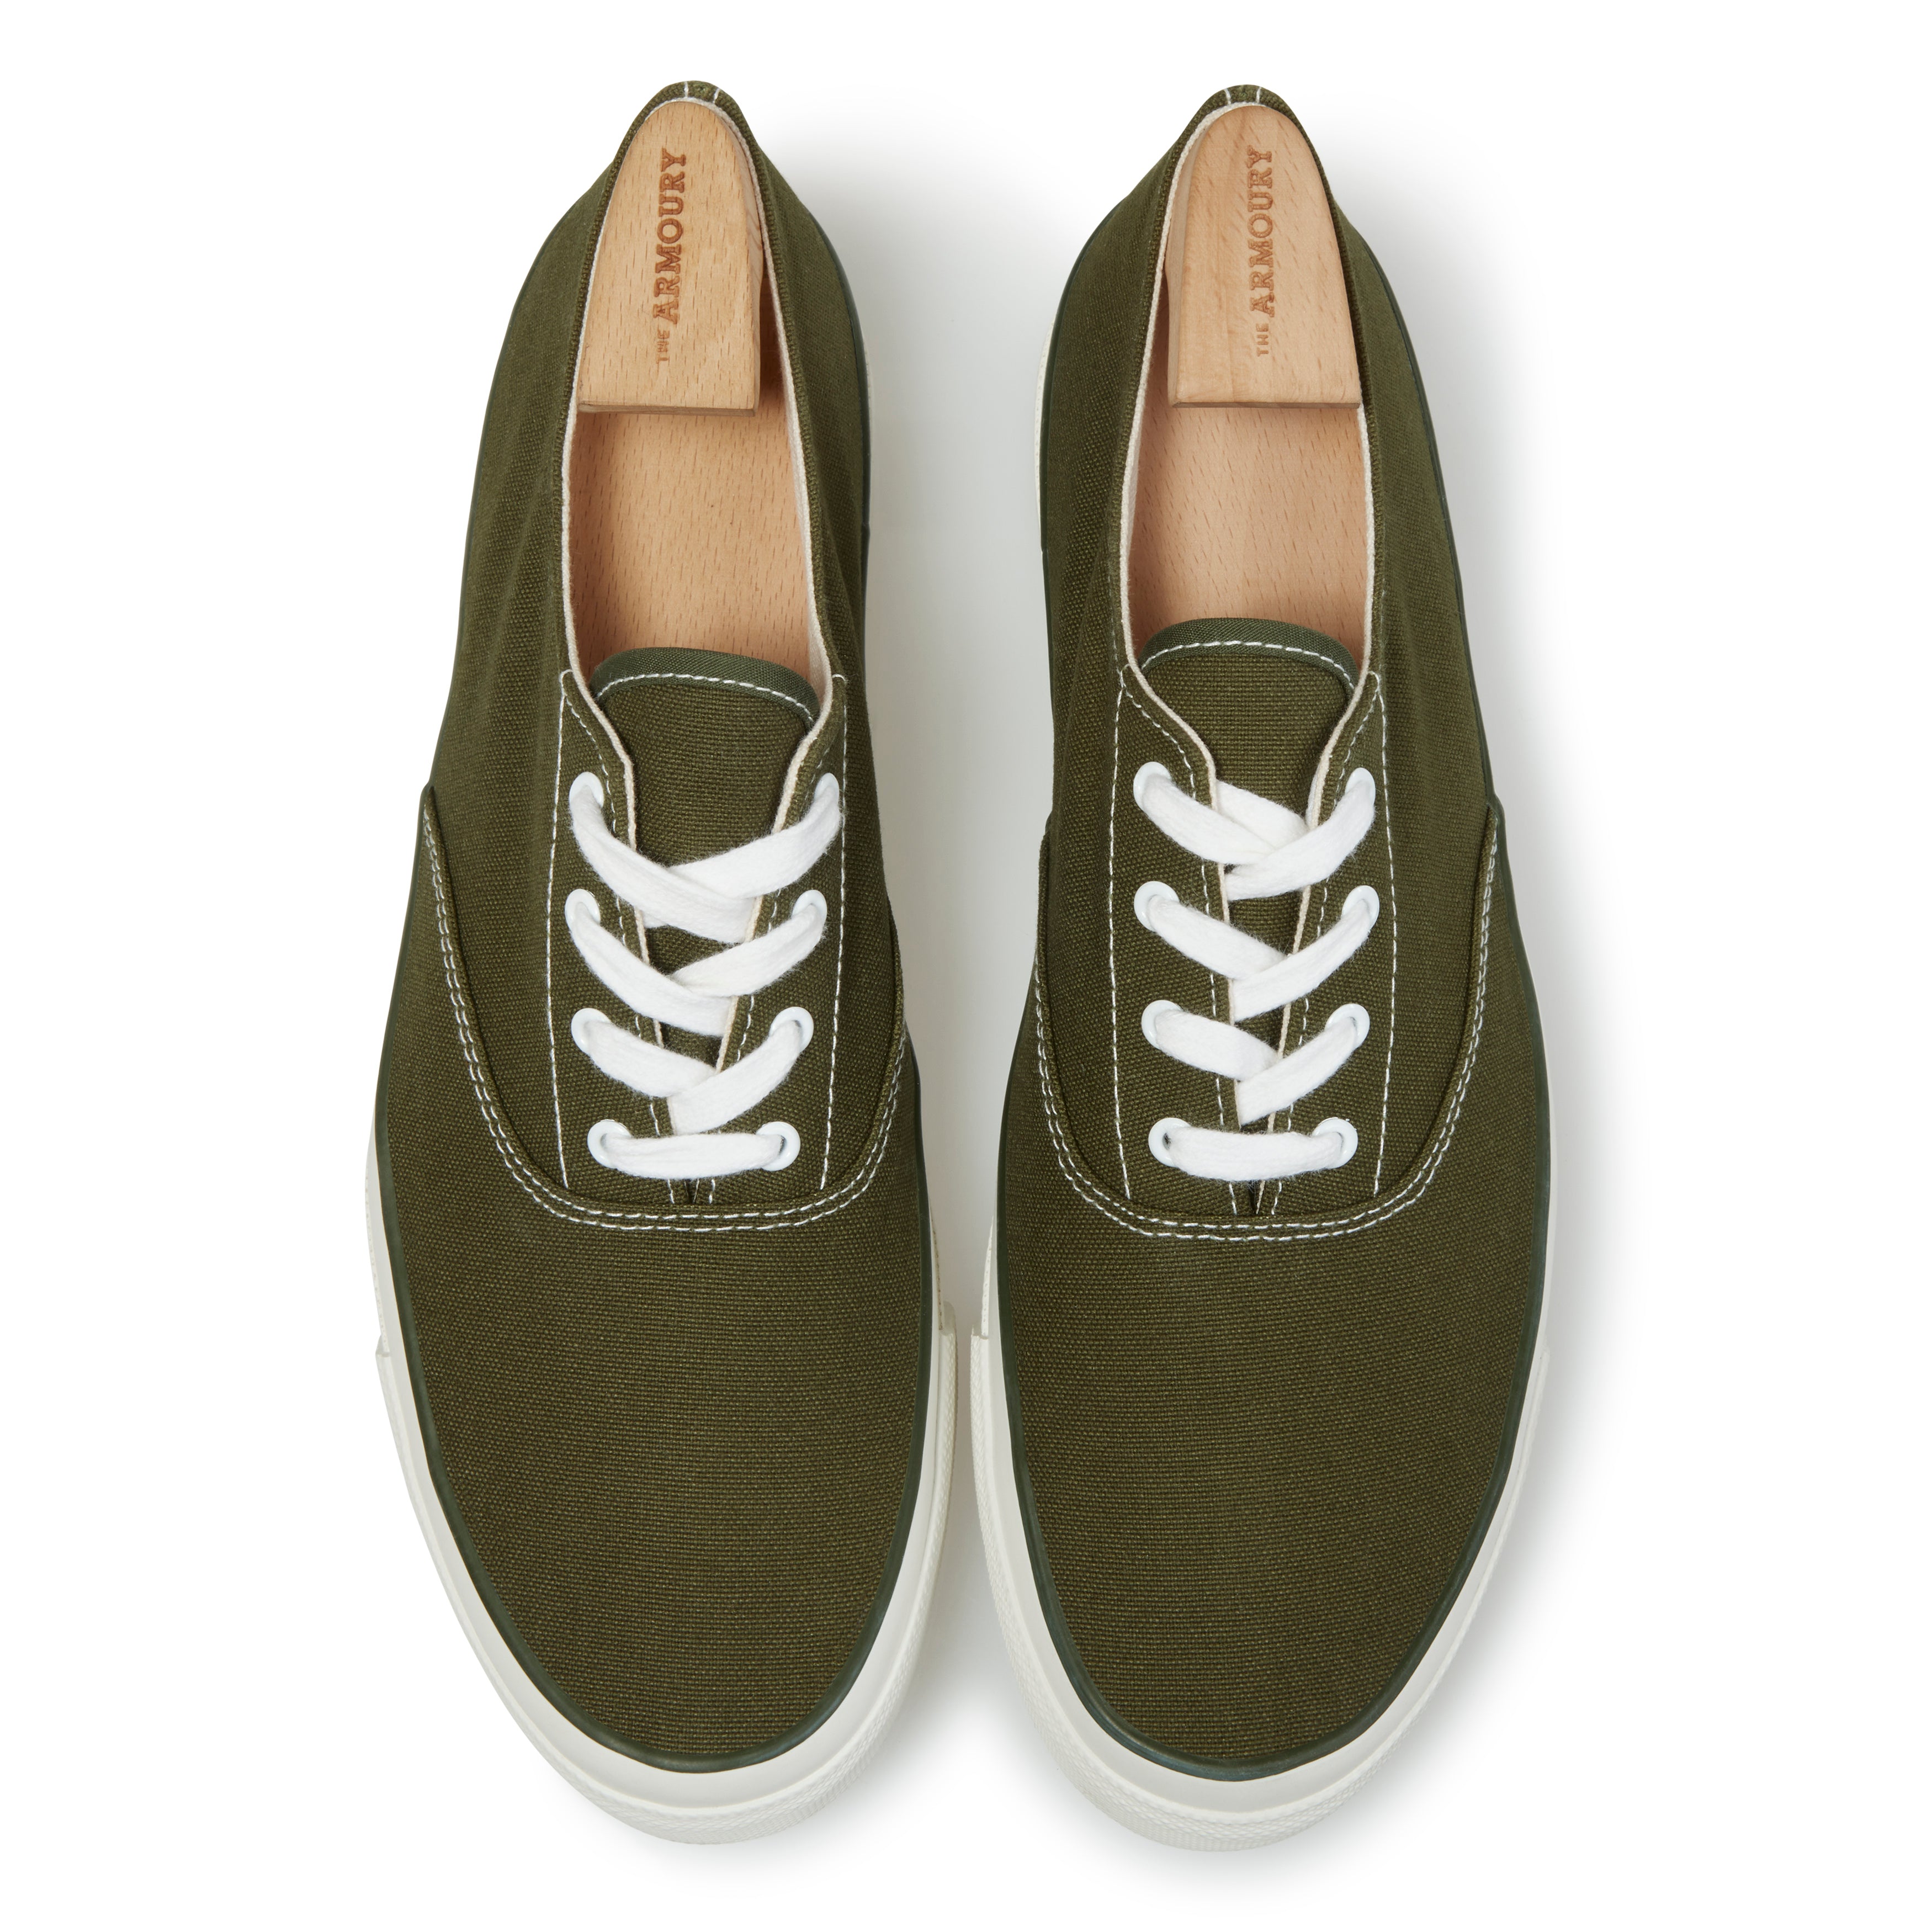 Cotton Canvas Deck Shoe Low - The Armoury